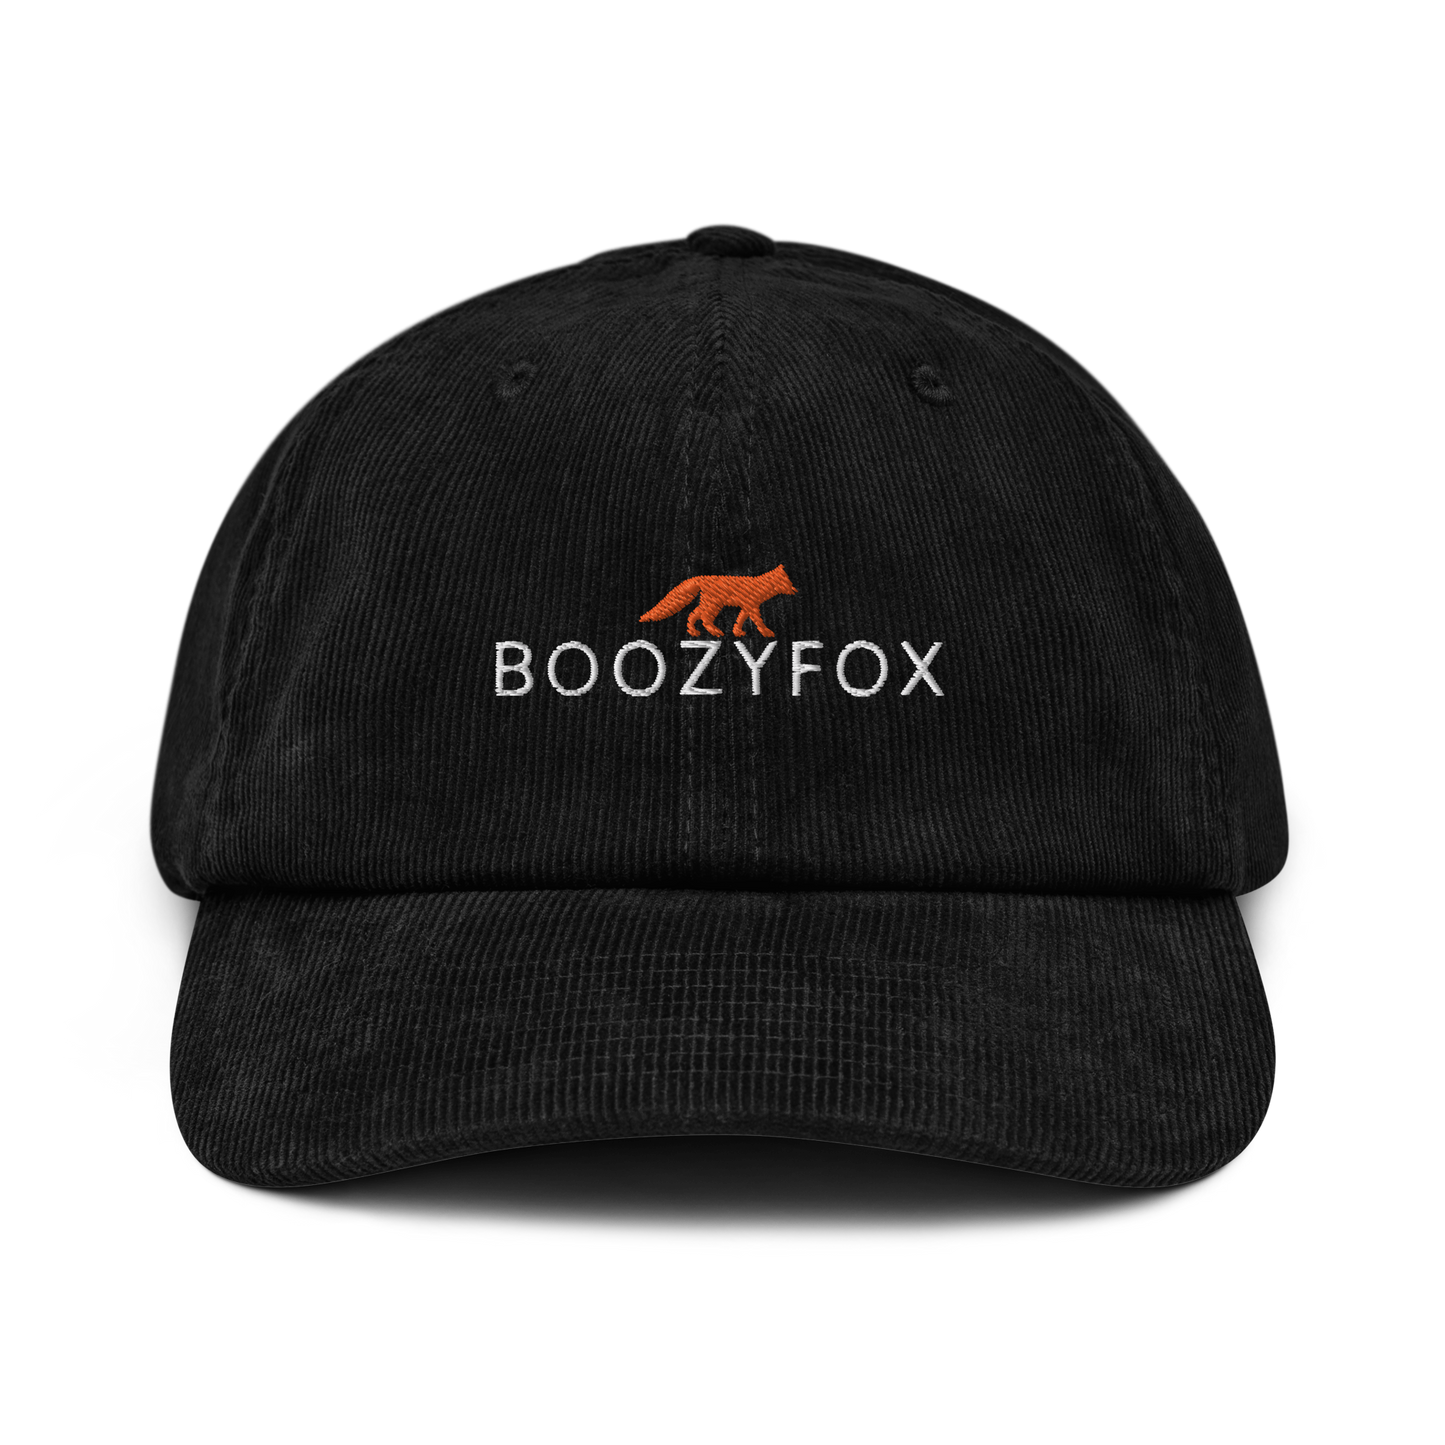 Black Corduroy Hat featuring an embroidered Boozy Fox logo on front. Shop Cool Corduroy Hats & Corduroy Caps Online - Boozy Fox